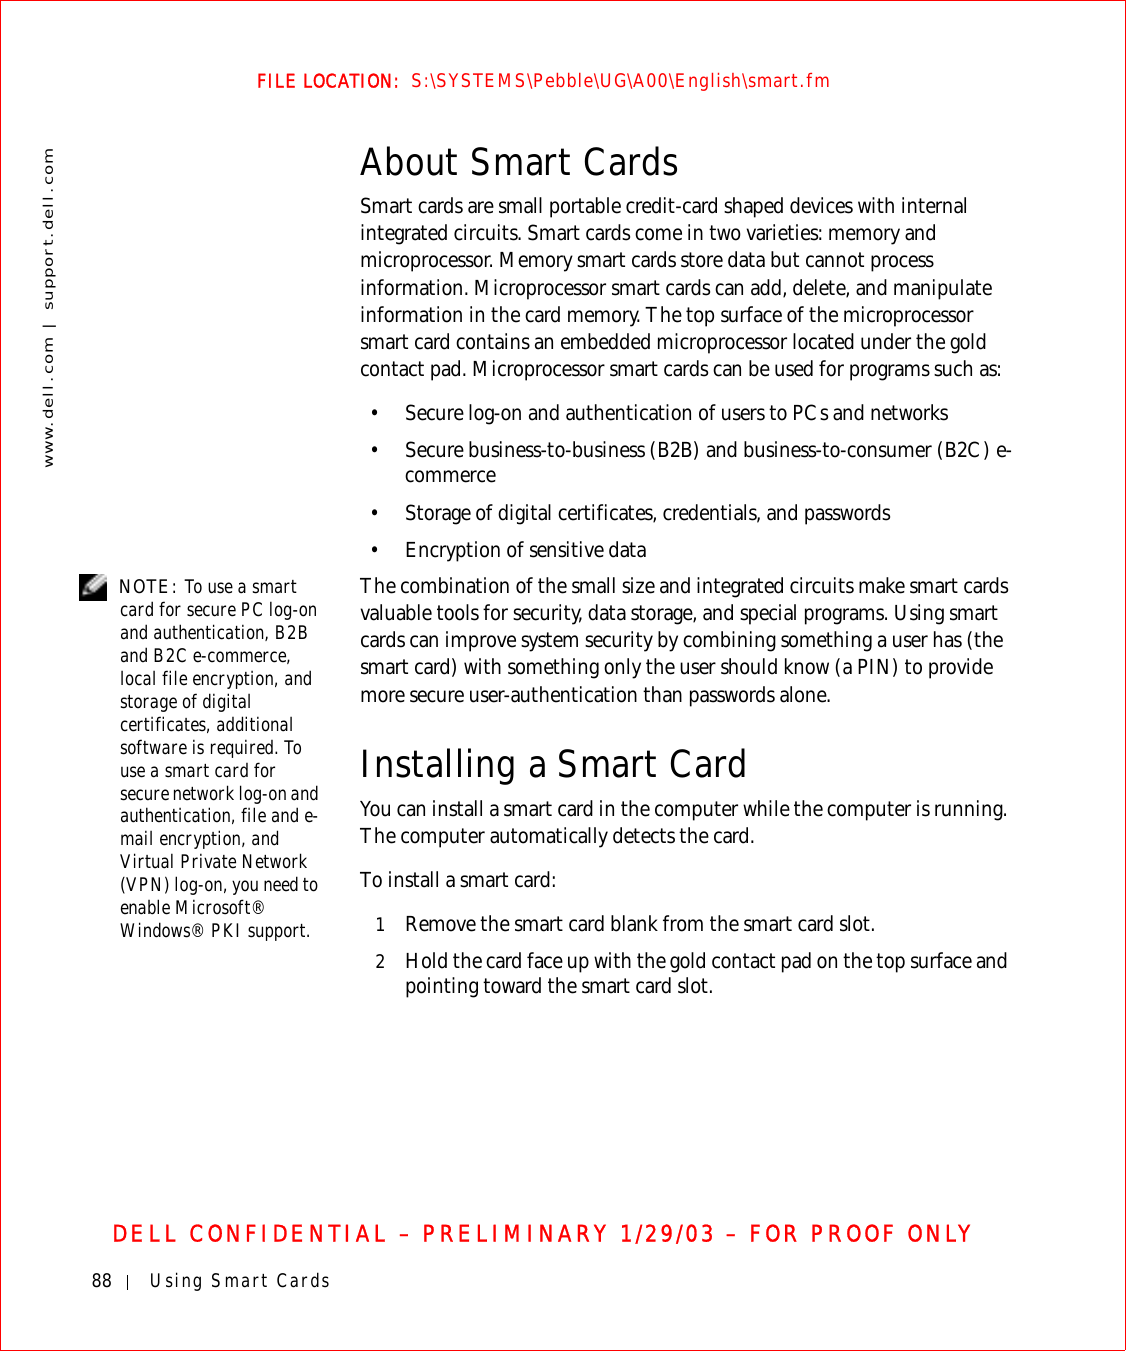 88 Using Smart Cardswww.dell.com | support.dell.comFILE LOCATION:  S:\SYSTEMS\Pebble\UG\A00\English\smart.fmDELL CONFIDENTIAL – PRELIMINARY 1/29/03 – FOR PROOF ONLYAbout Smart CardsSmart cards are small portable credit-card shaped devices with internal integrated circuits. Smart cards come in two varieties: memory and microprocessor. Memory smart cards store data but cannot process information. Microprocessor smart cards can add, delete, and manipulate information in the card memory. The top surface of the microprocessor smart card contains an embedded microprocessor located under the gold contact pad. Microprocessor smart cards can be used for programs such as:• Secure log-on and authentication of users to PCs and networks• Secure business-to-business (B2B) and business-to-consumer (B2C) e-commerce• Storage of digital certificates, credentials, and passwords• Encryption of sensitive data NOTE: To use a smart card for secure PC log-on and authentication, B2B and B2C e-commerce, local file encryption, and storage of digital certificates, additional software is required. To use a smart card for secure network log-on and authentication, file and e-mail encryption, and Virtual Private Network (VPN) log-on, you need to enable Microsoft® Windows® PKI support.The combination of the small size and integrated circuits make smart cards valuable tools for security, data storage, and special programs. Using smart cards can improve system security by combining something a user has (the smart card) with something only the user should know (a PIN) to provide more secure user-authentication than passwords alone.Installing a Smart CardYou can install a smart card in the computer while the computer is running. The computer automatically detects the card.To install a smart card:1Remove the smart card blank from the smart card slot.2Hold the card face up with the gold contact pad on the top surface and pointing toward the smart card slot.